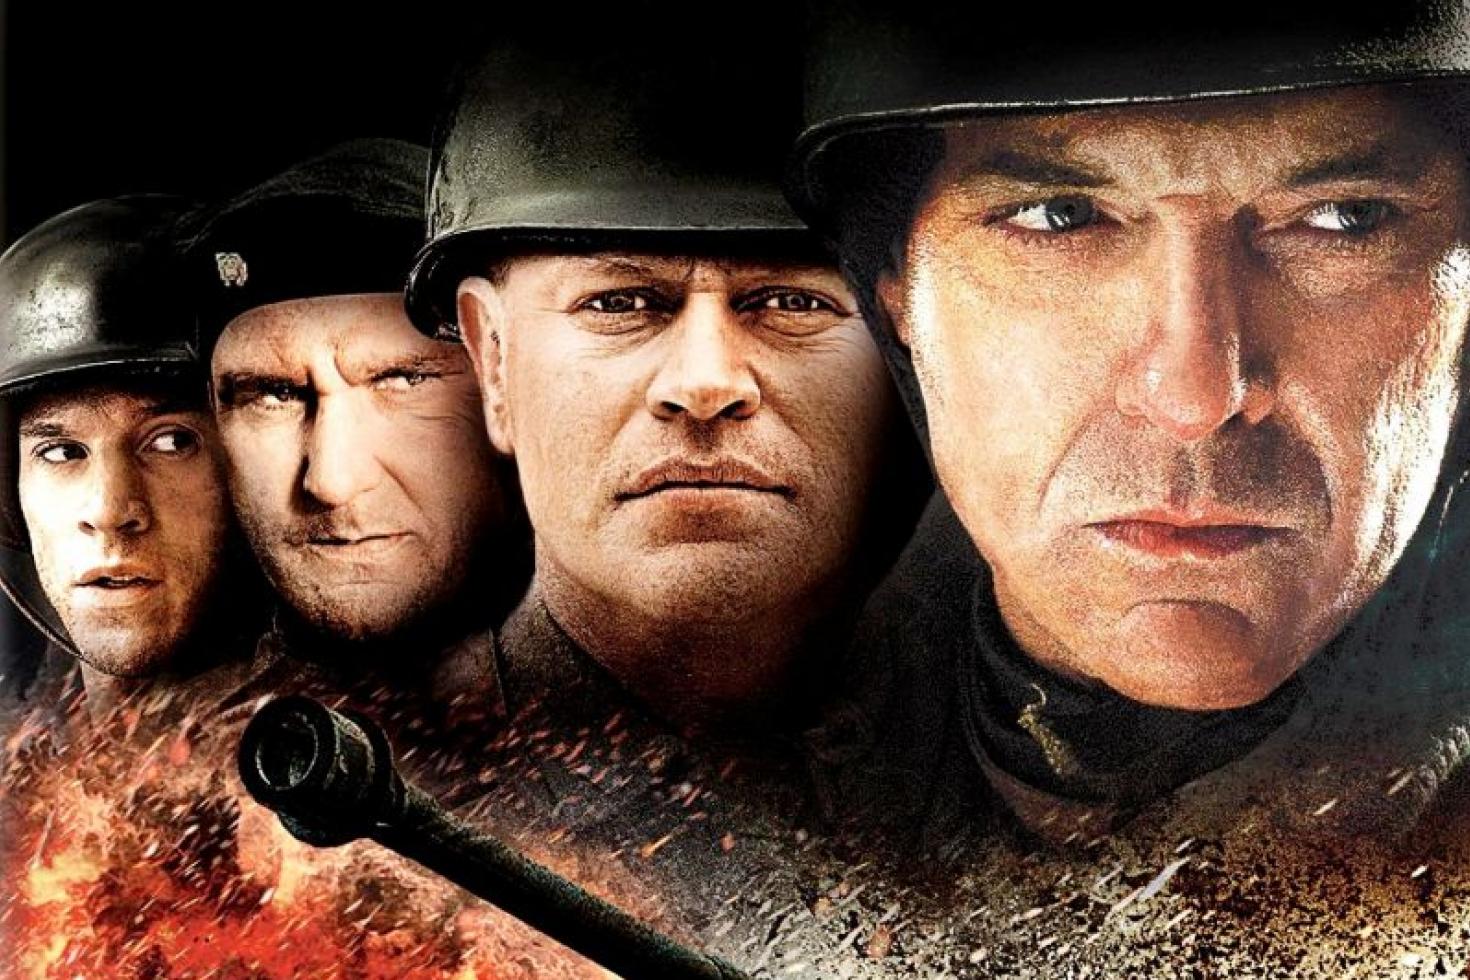 the company of heroes movie